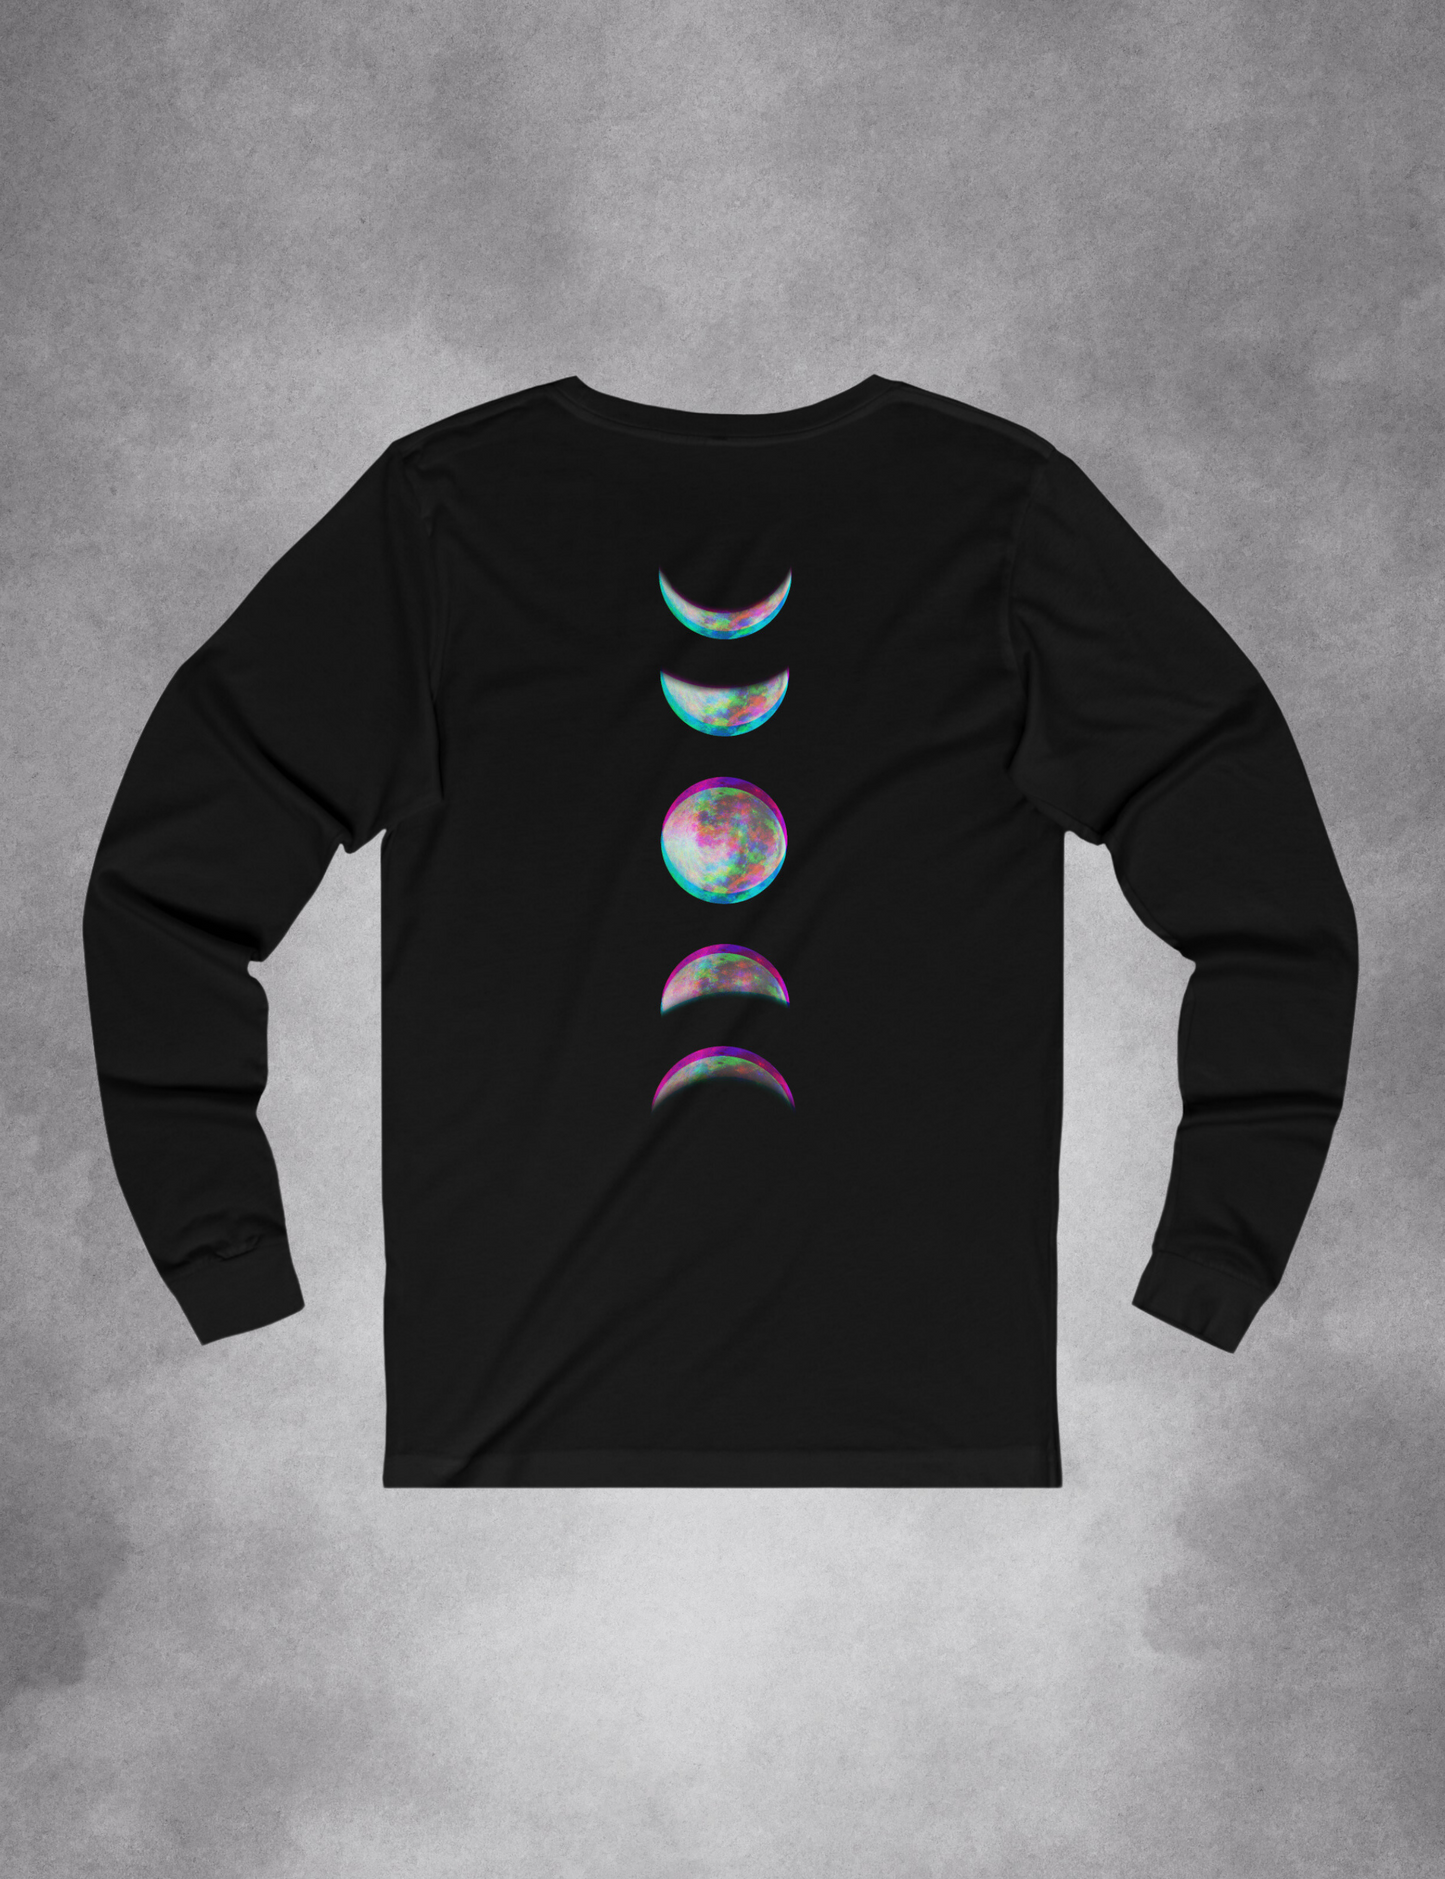 Glitch Moon Phase Edgy Plus Size Goth Witchy Long Sleeve Women's Shirt